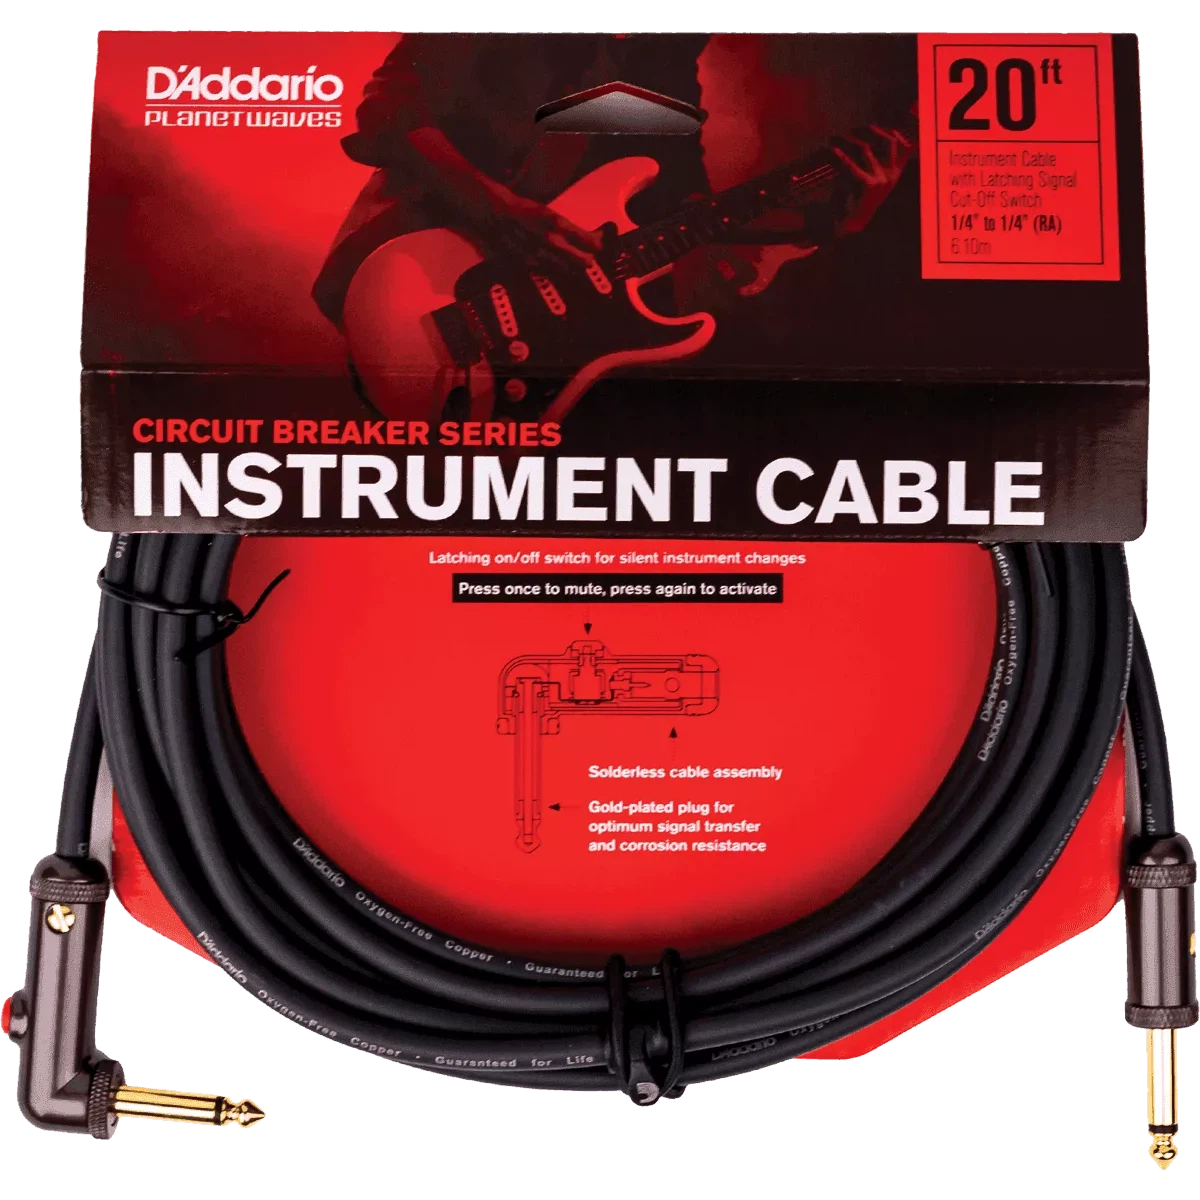 Dây Cáp Kết Nối D'Addario Circuit Breaker Instrument Cable PW-AGLRA - Việt Music